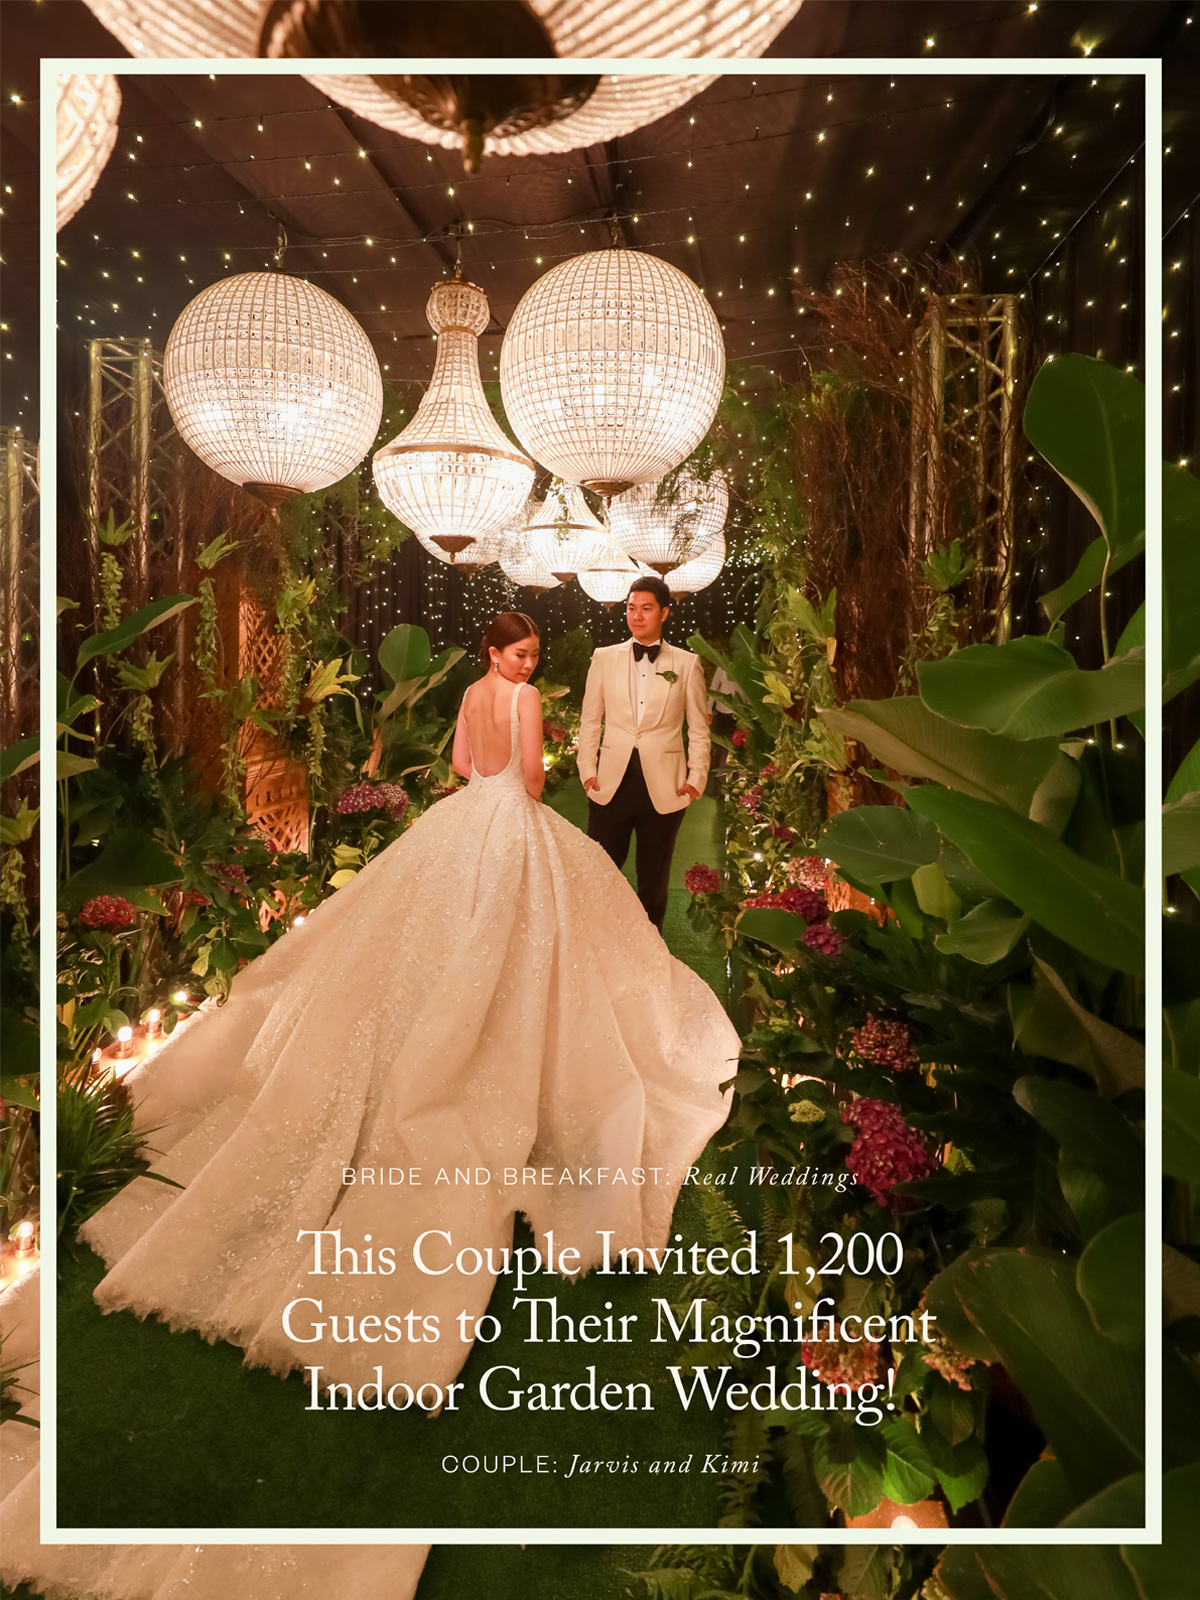 This Couple Invited 1,200 Guests to Their Magnificent Indoor Garden Wedding!